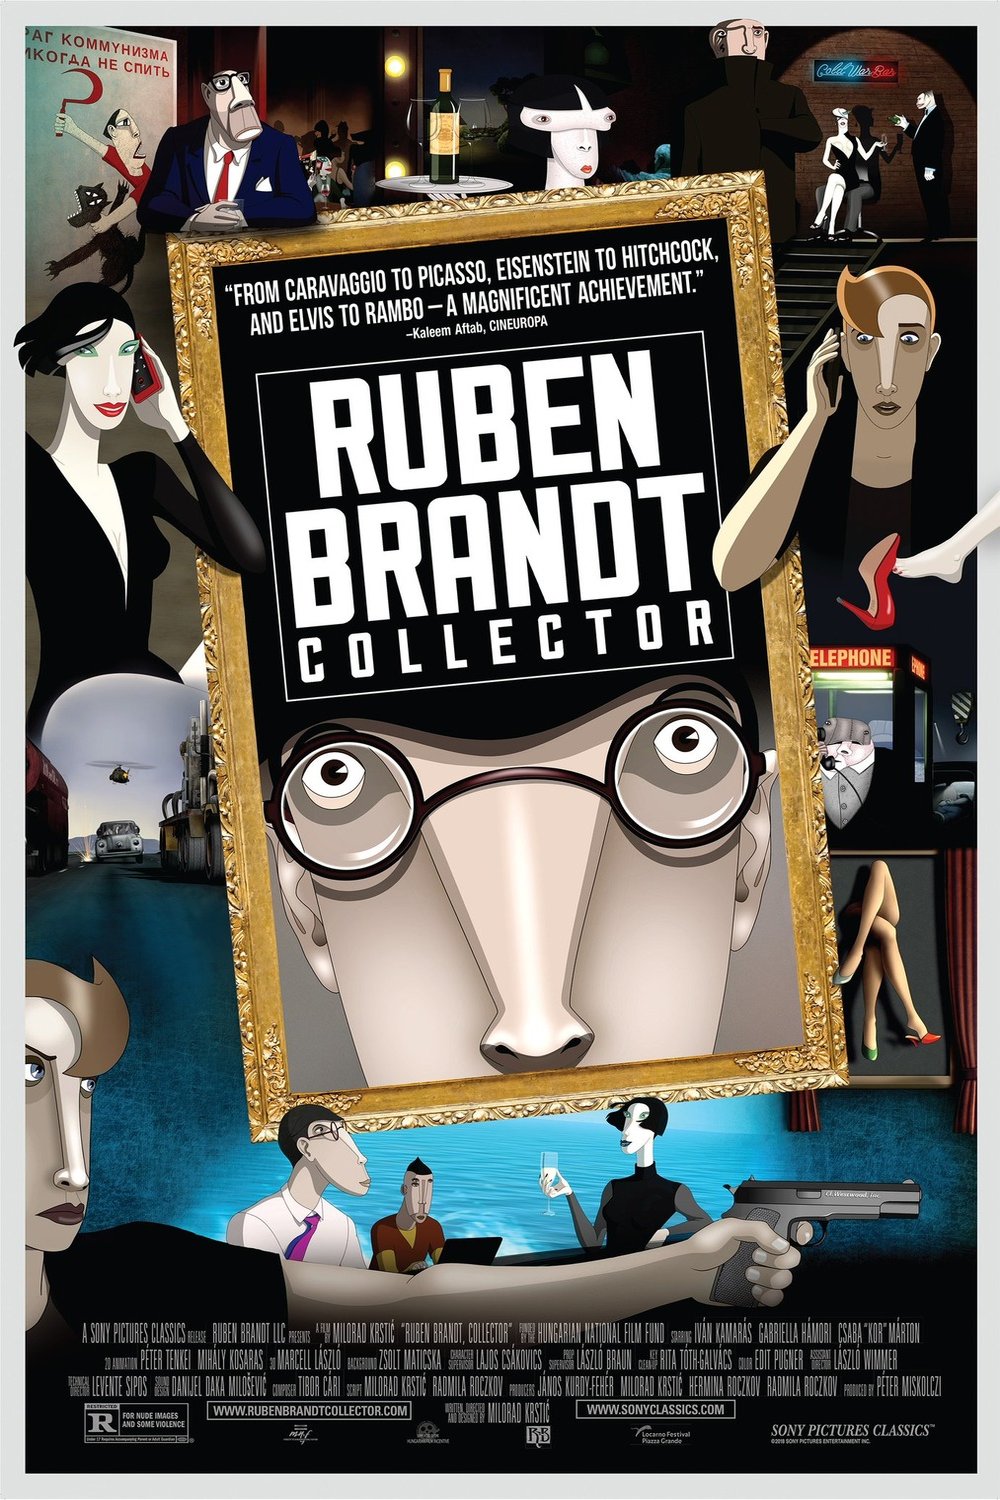 Poster of the movie Ruben Brandt, Collector